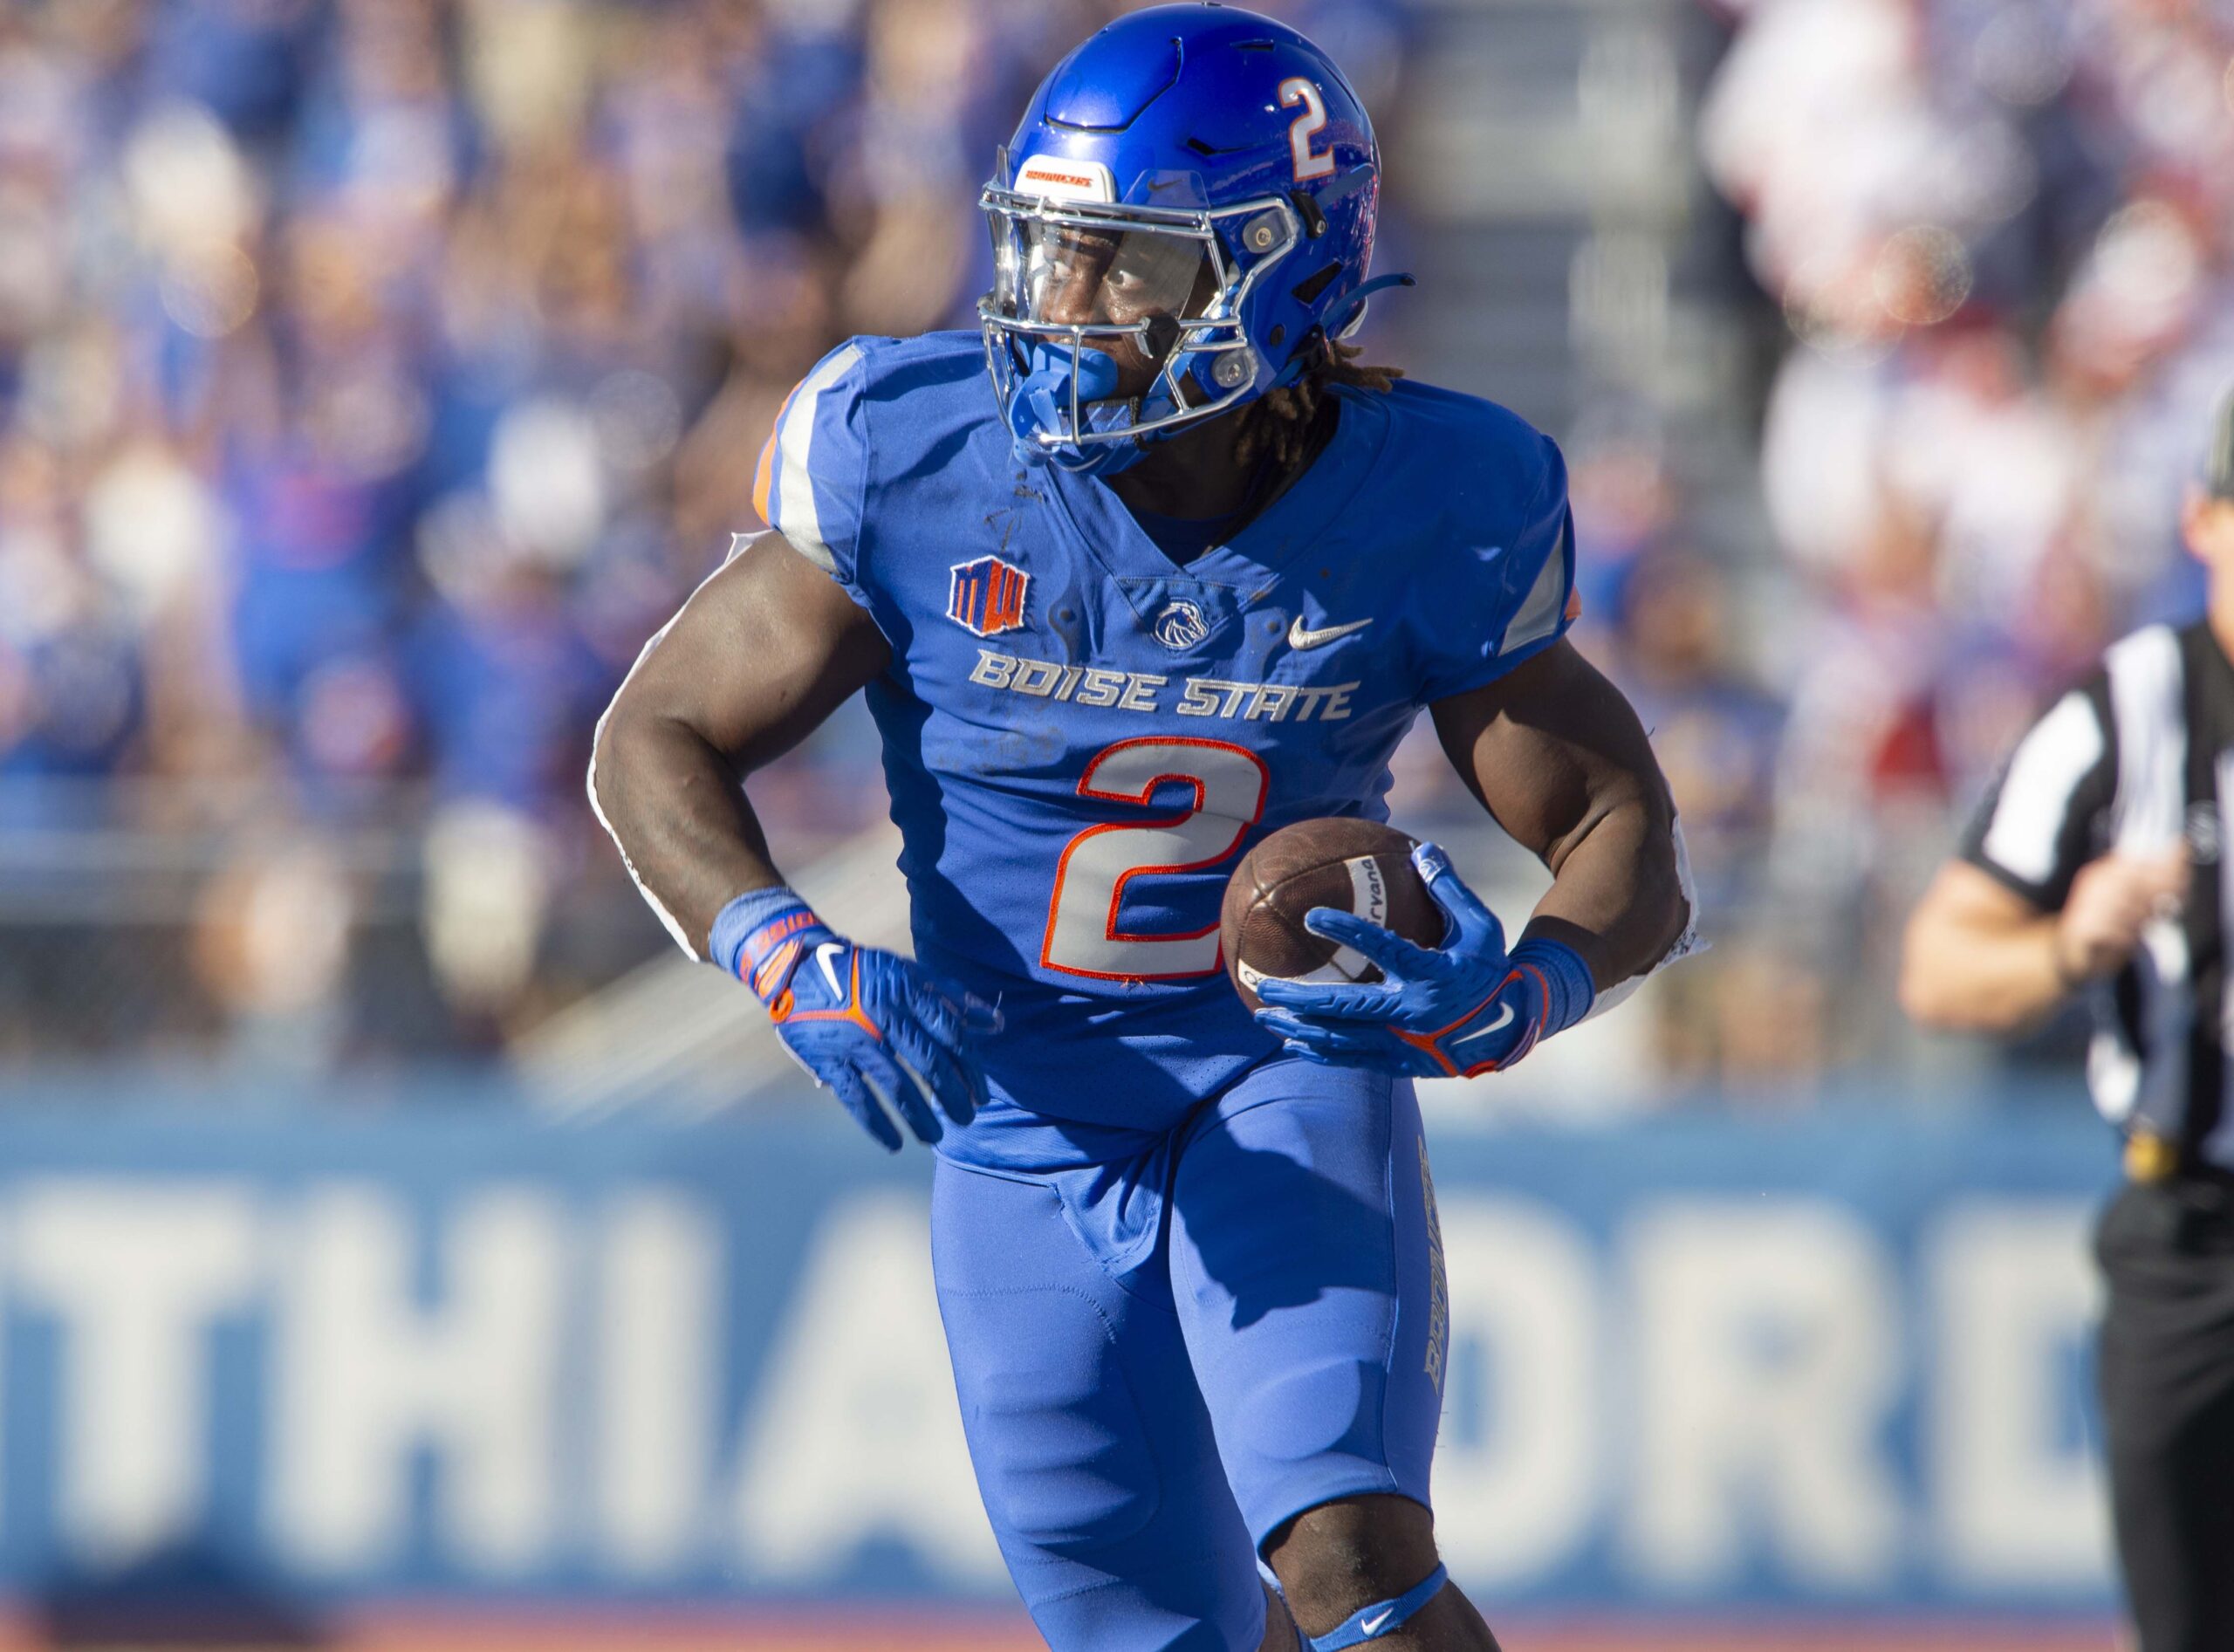 Boise State running back during game.